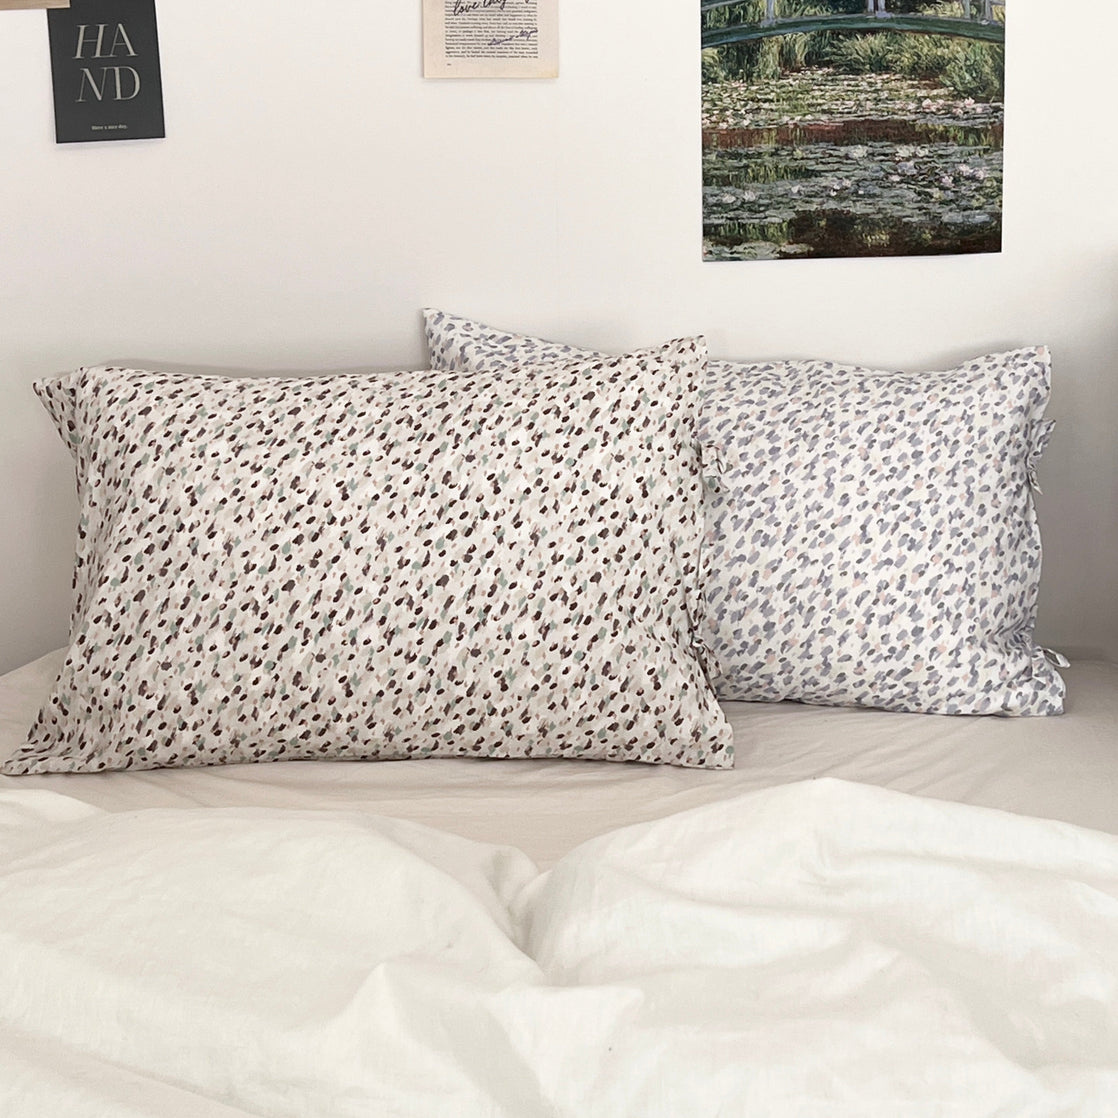 OR-2232-Little Rooms-リボン付き枕カバー｜monet pillow cover